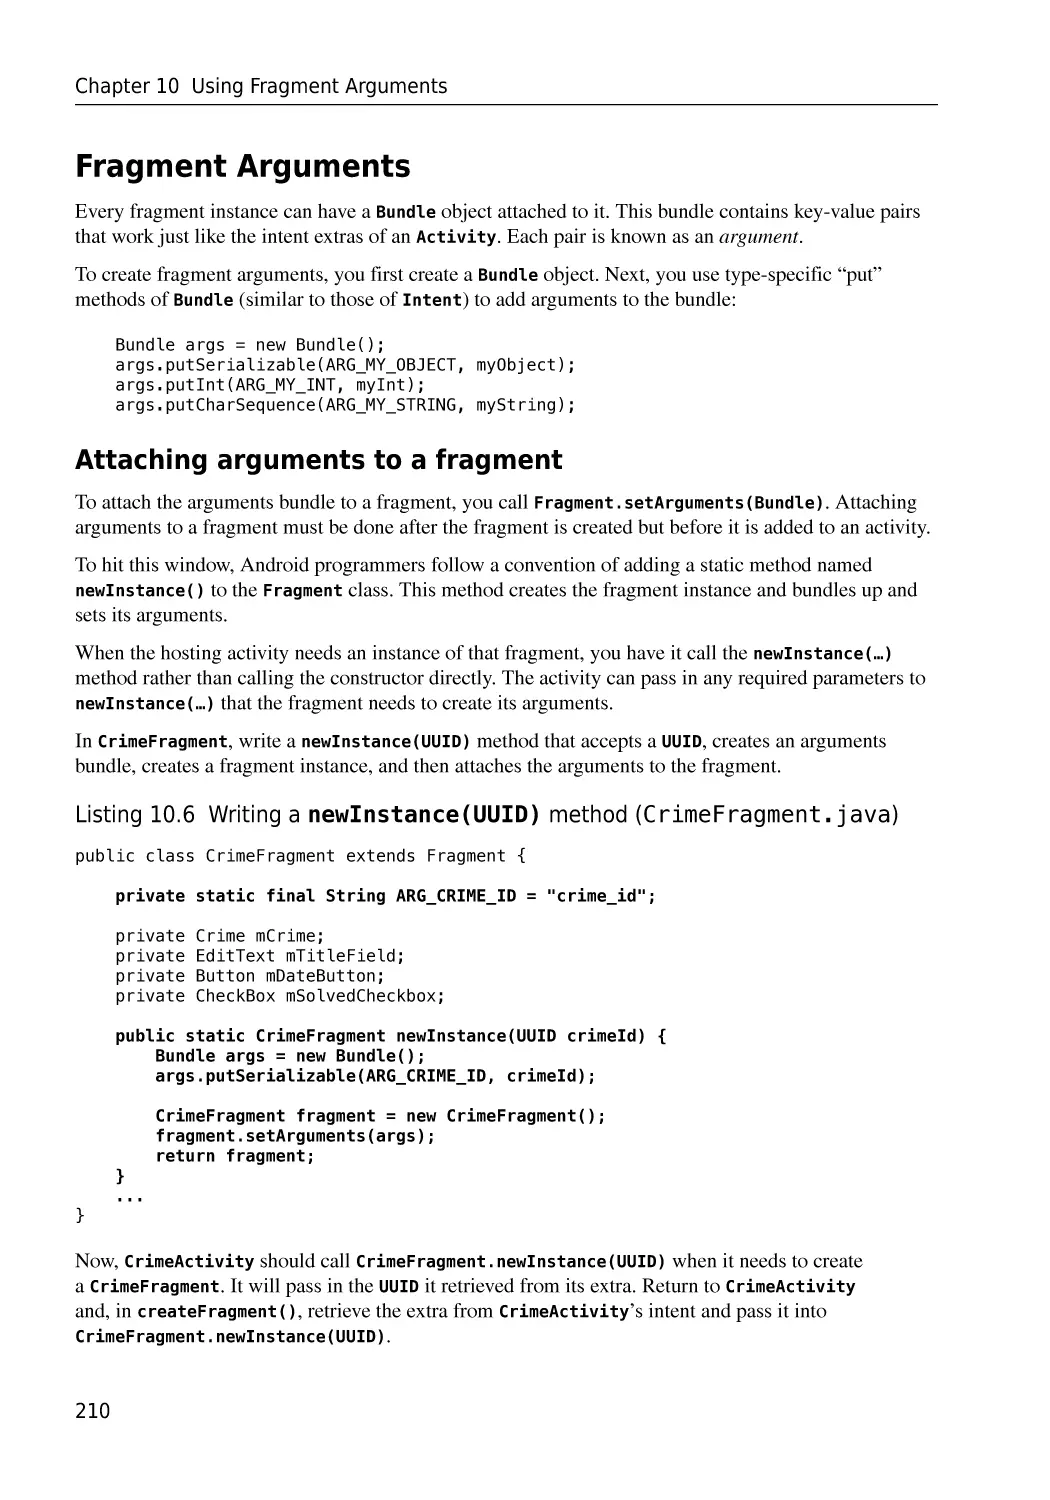 Fragment Arguments
Attaching arguments to a fragment